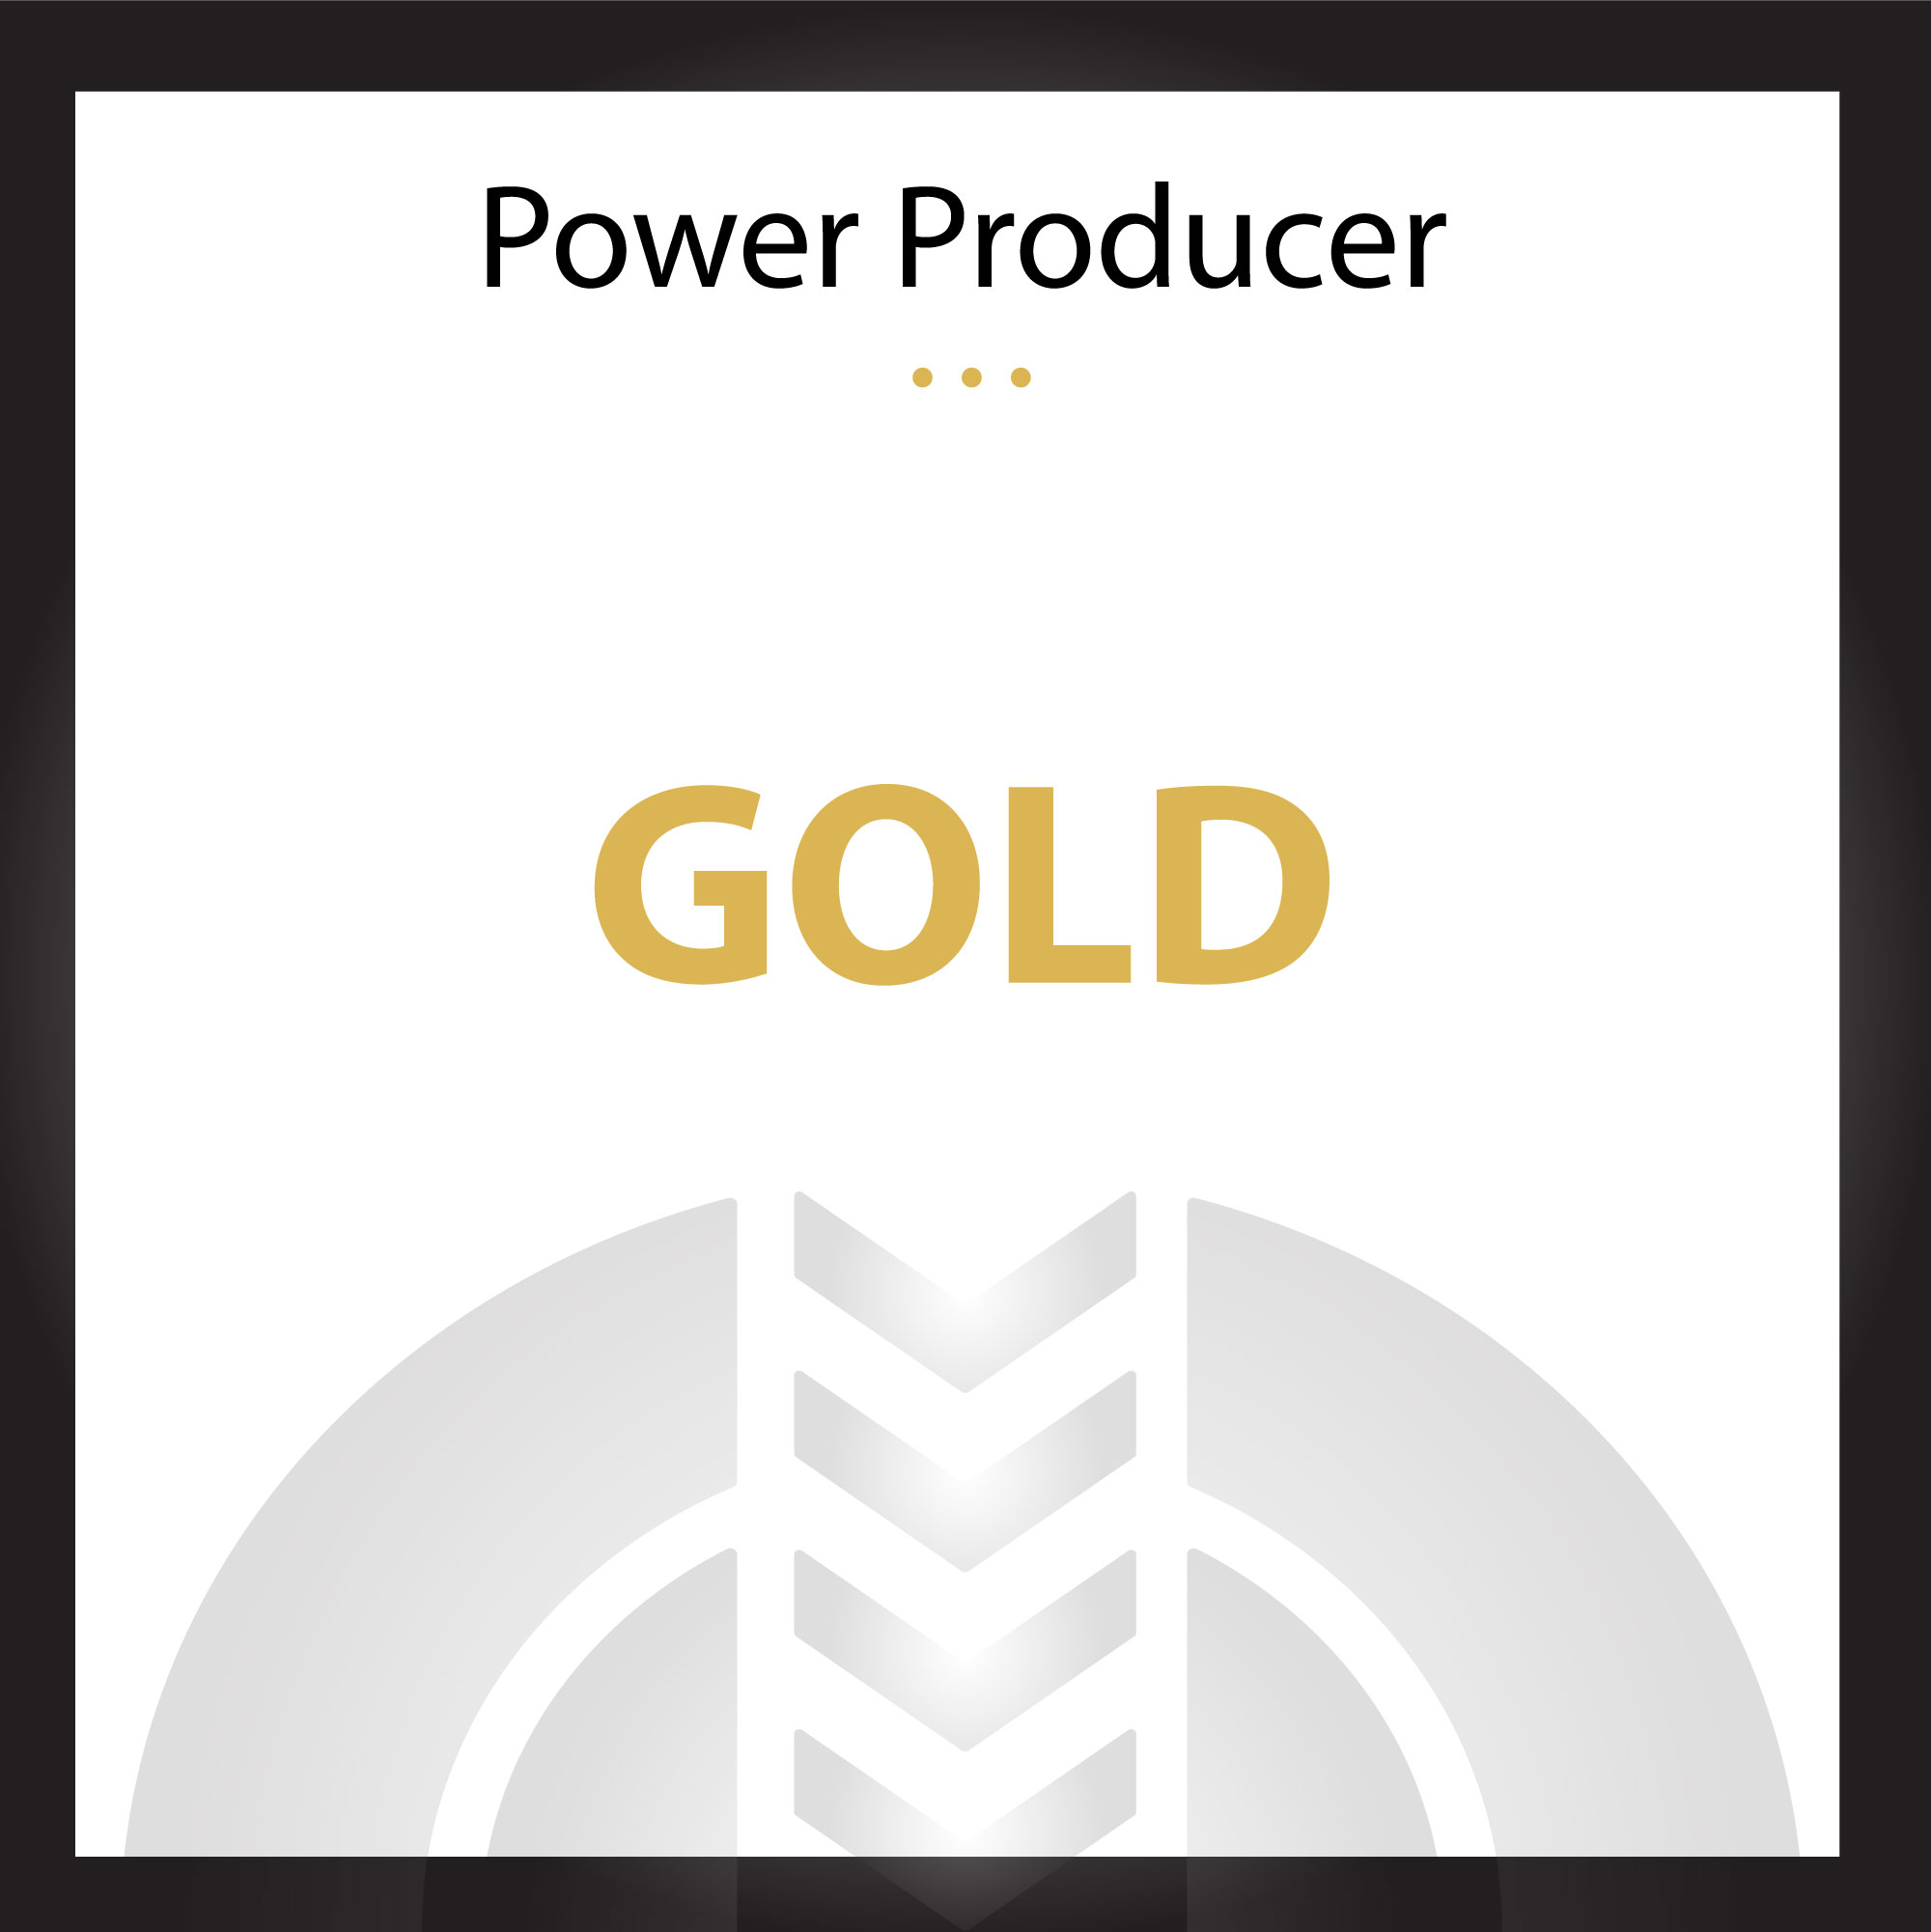 Power Producer Gold